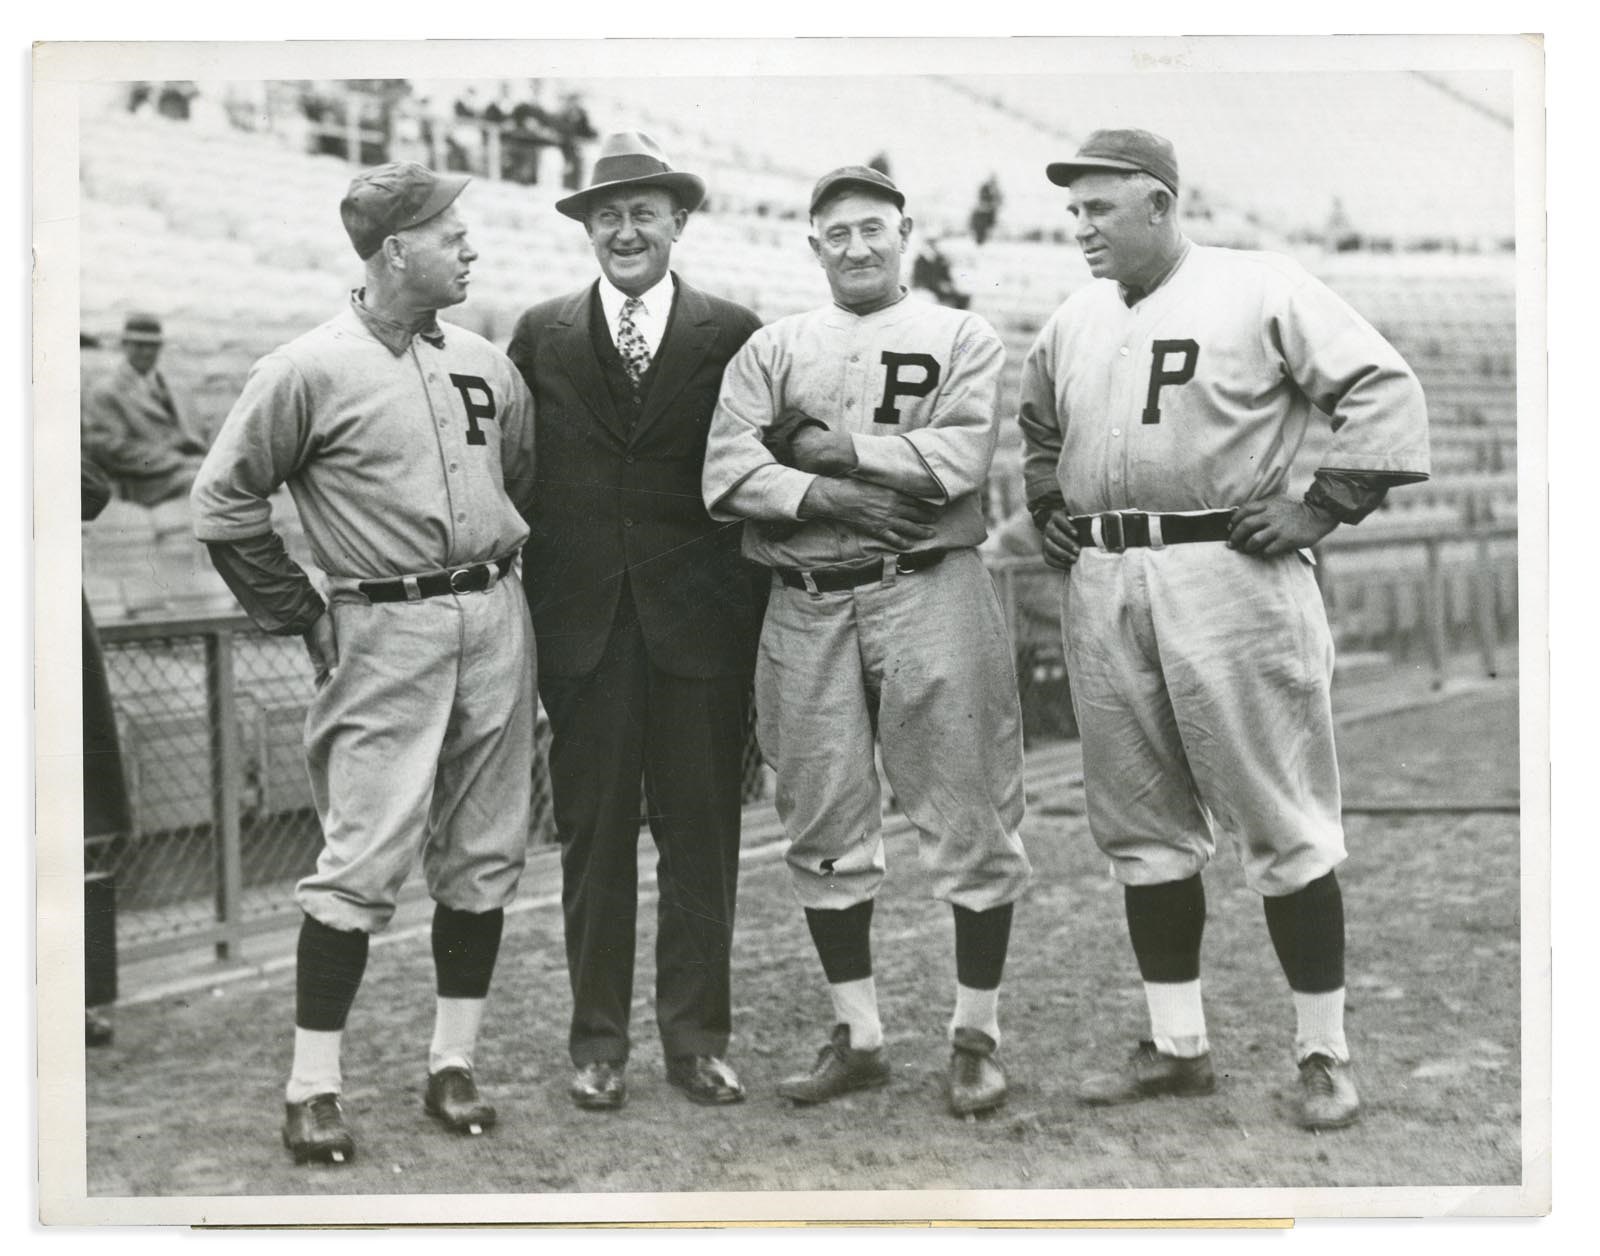 Vintage Sports Photographs - Rare Image of Ty Cobb and Honus Wagner Together (1933)